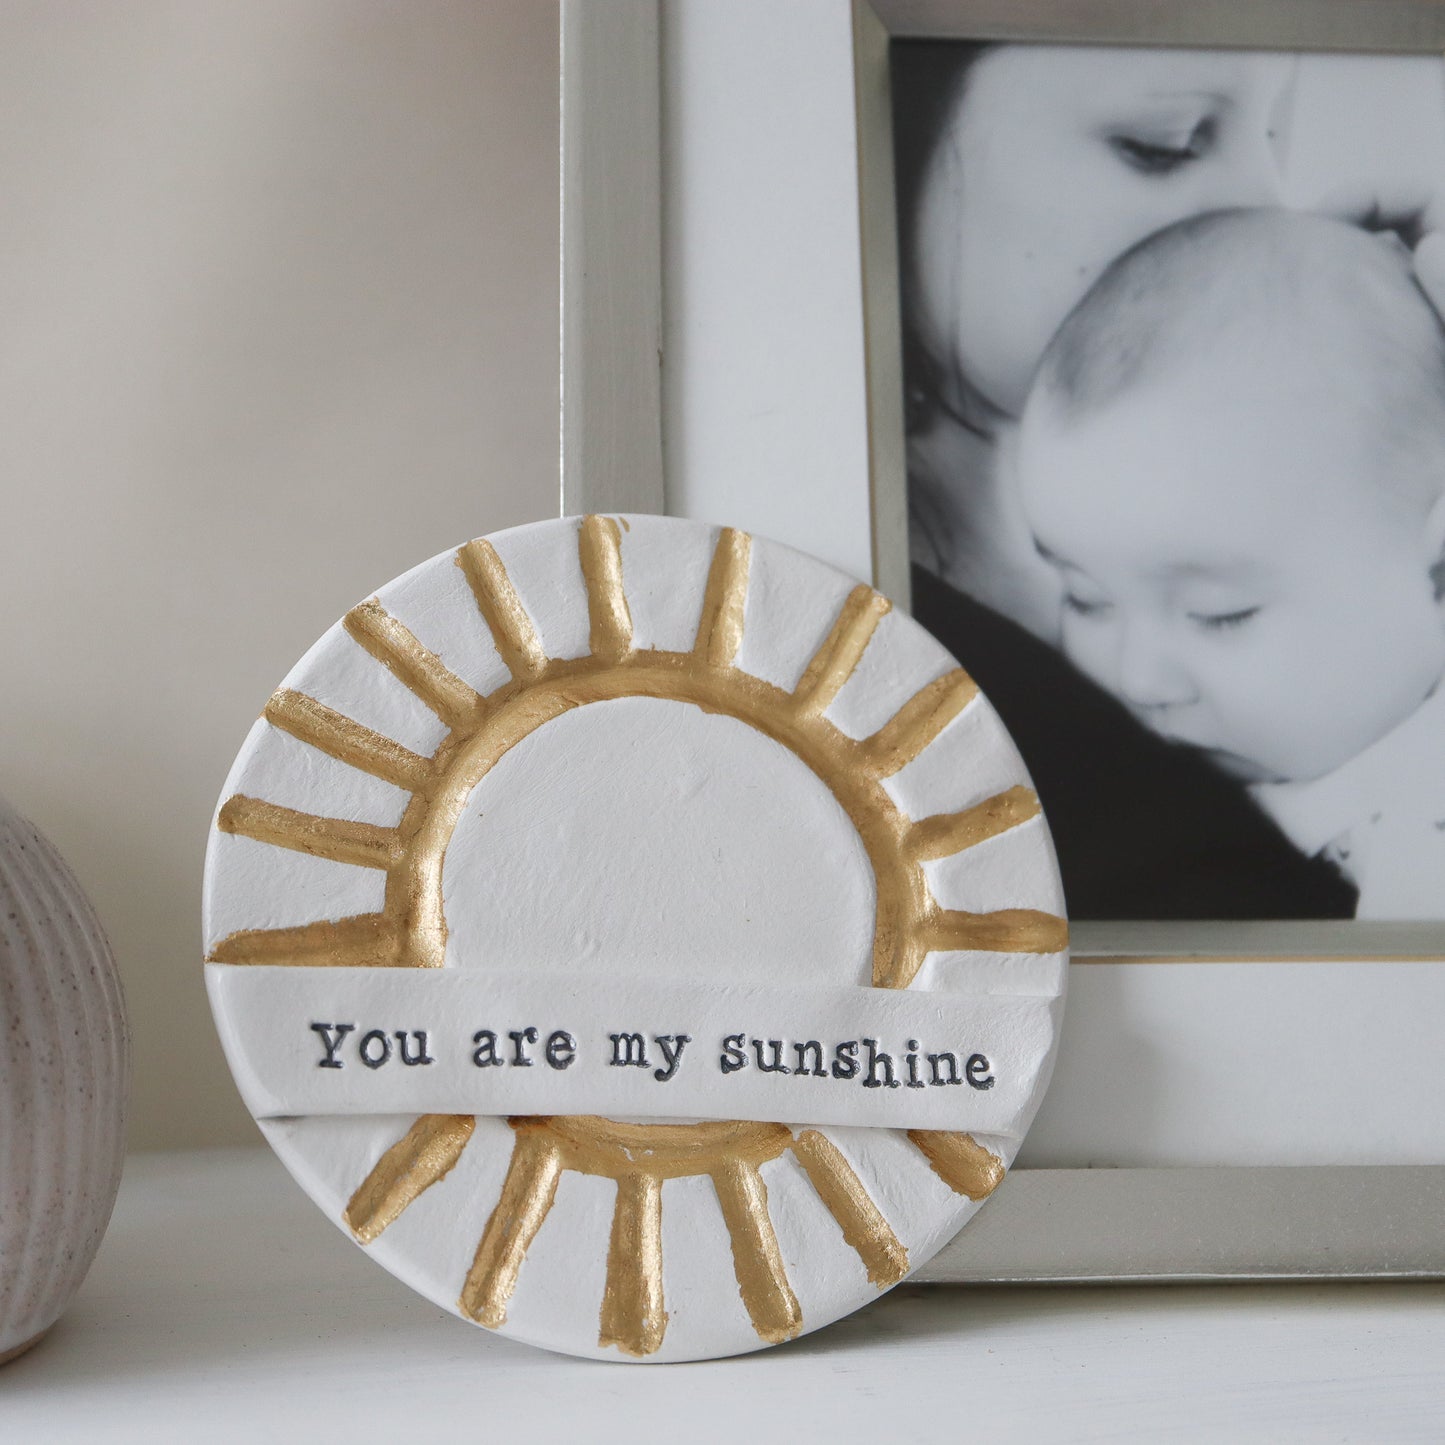 SALE You are my sunshine wall plaque